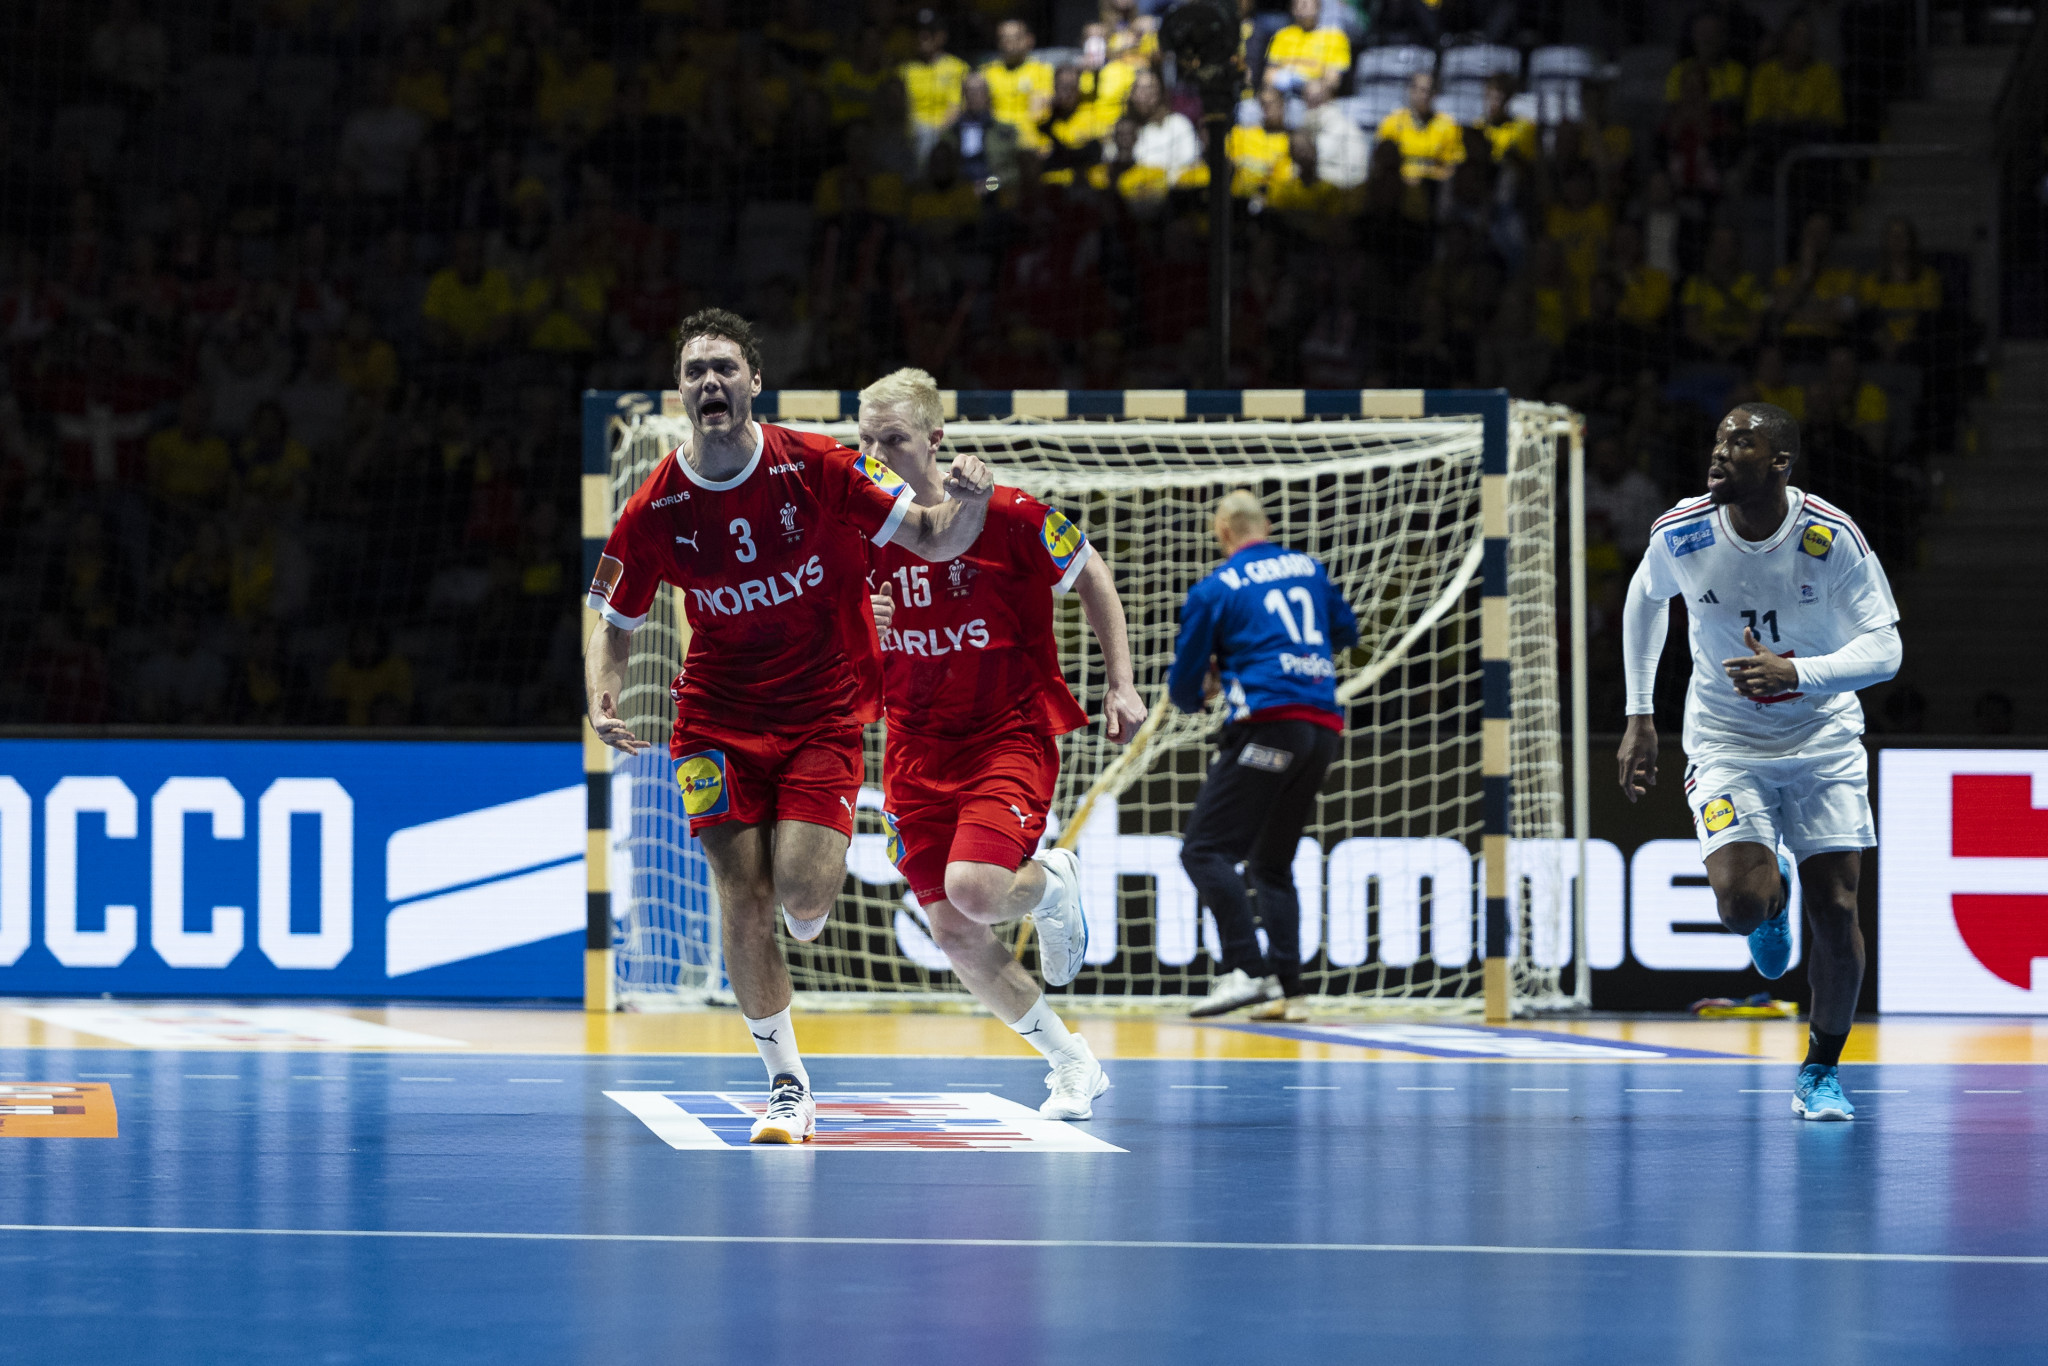 The MoU was signed last month during the Men's Handball World Championships ©Getty Images 